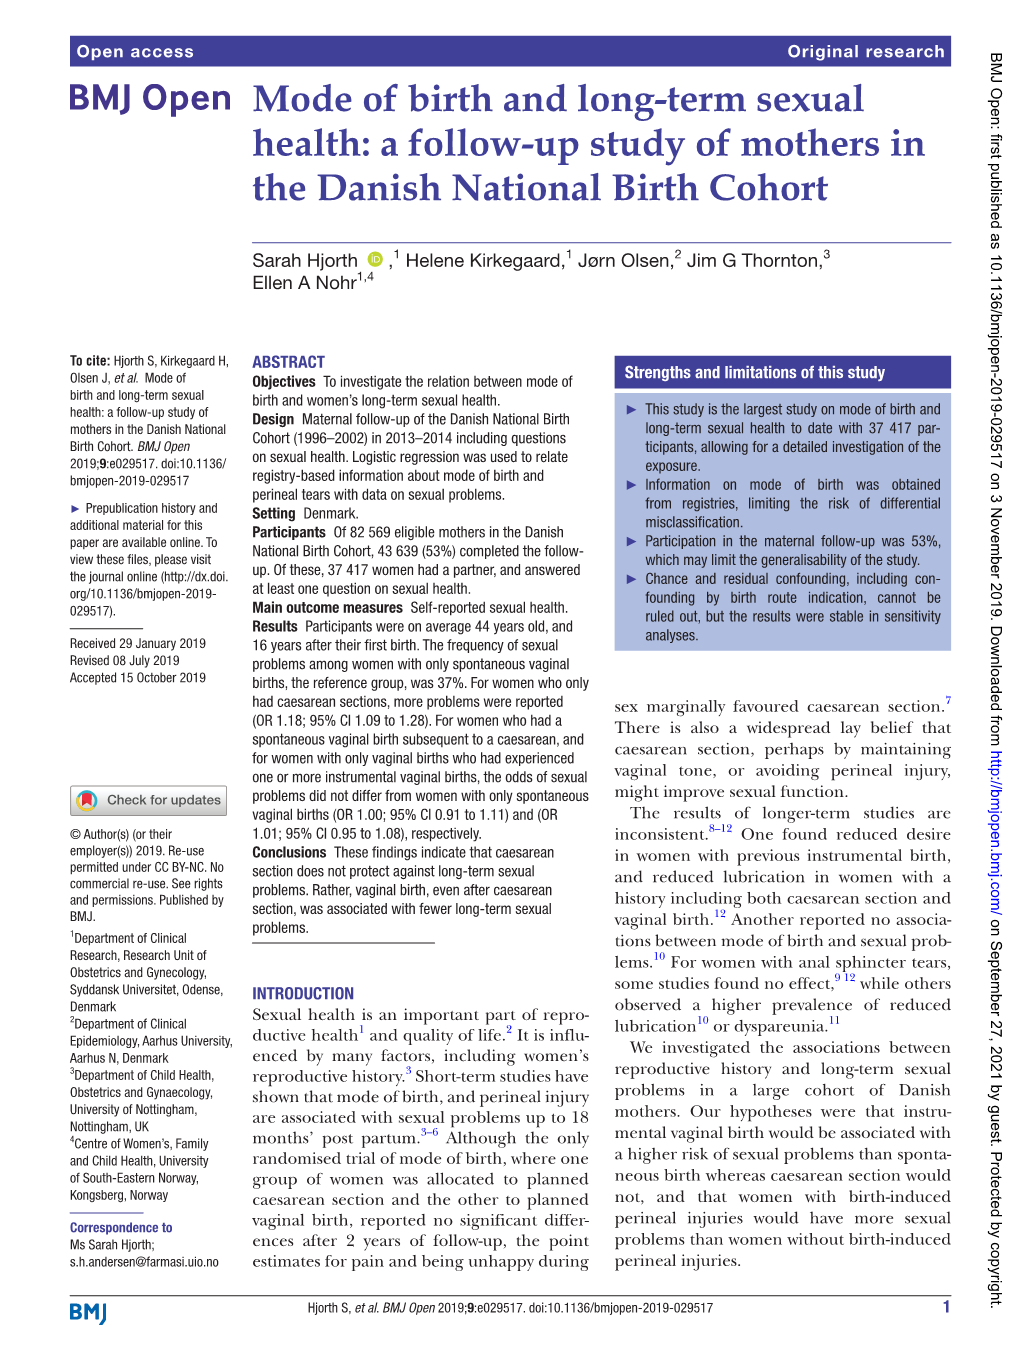 Up Study of Mothers in the Danish National Birth Cohort